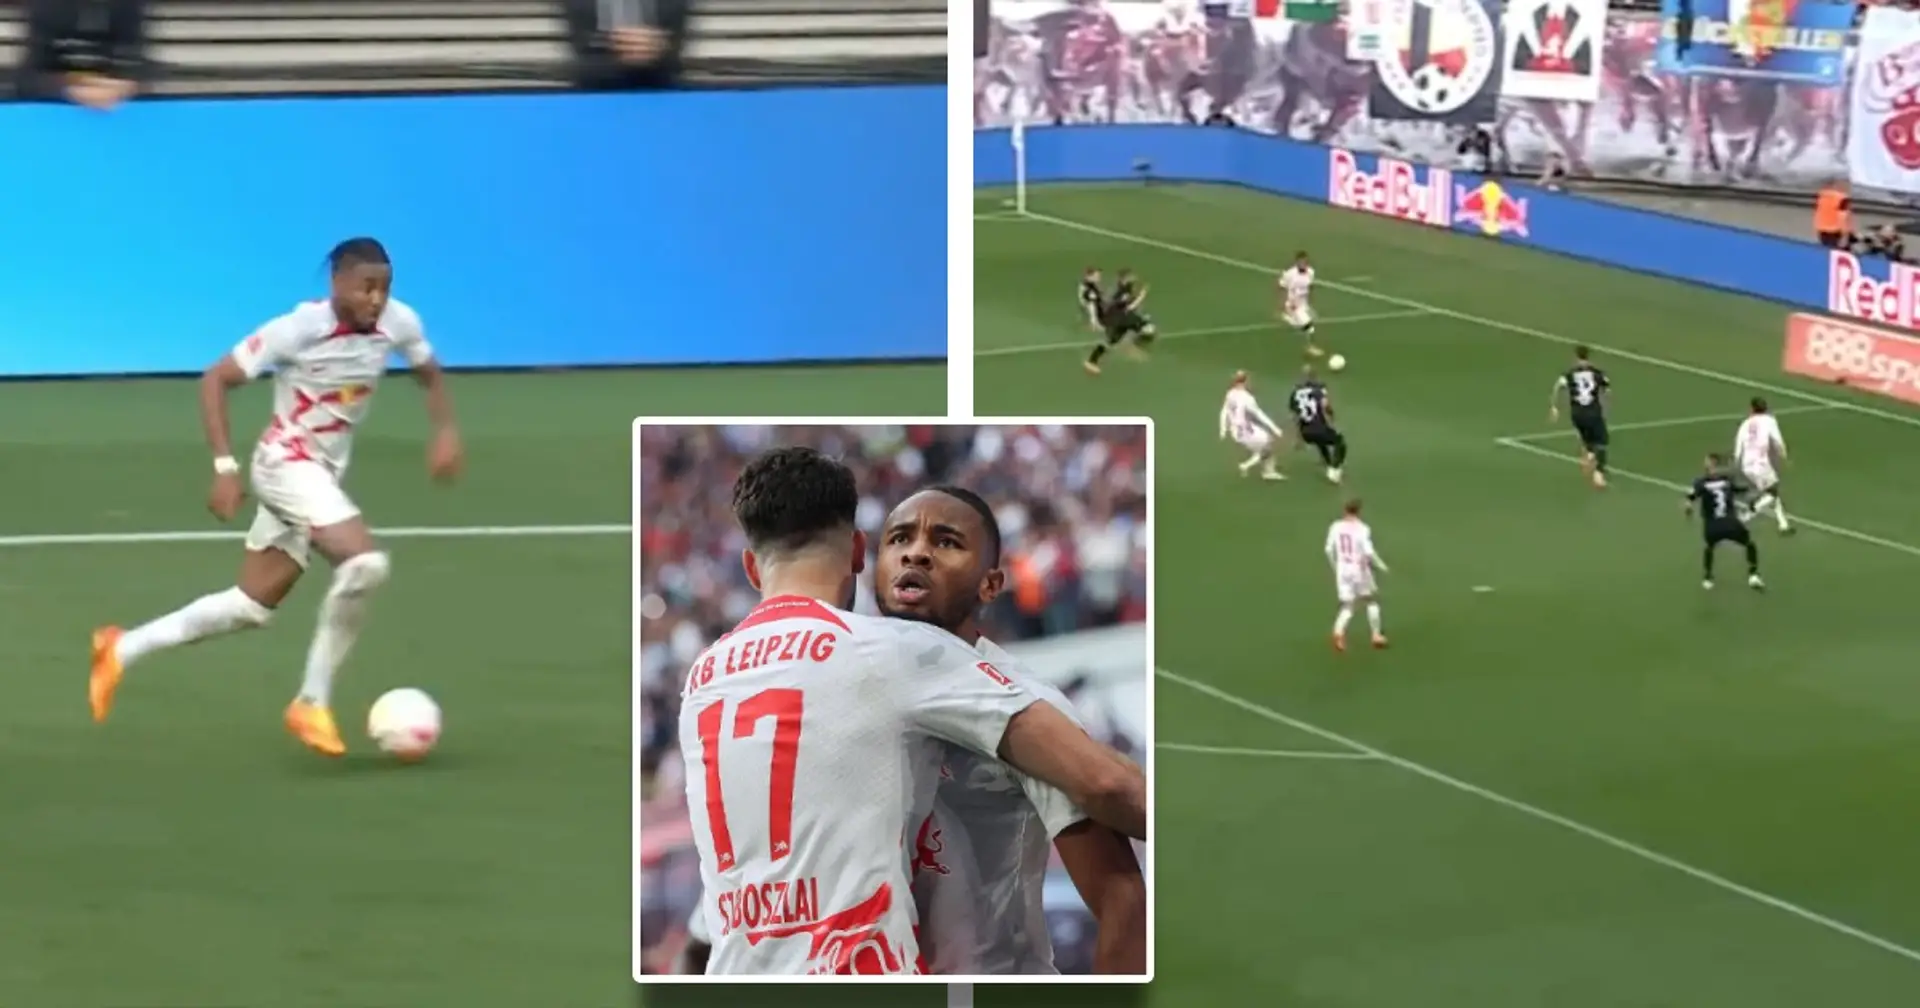 Nkunku goes on incredible solo run to set up stoppage-time winner for Leipzig (video)